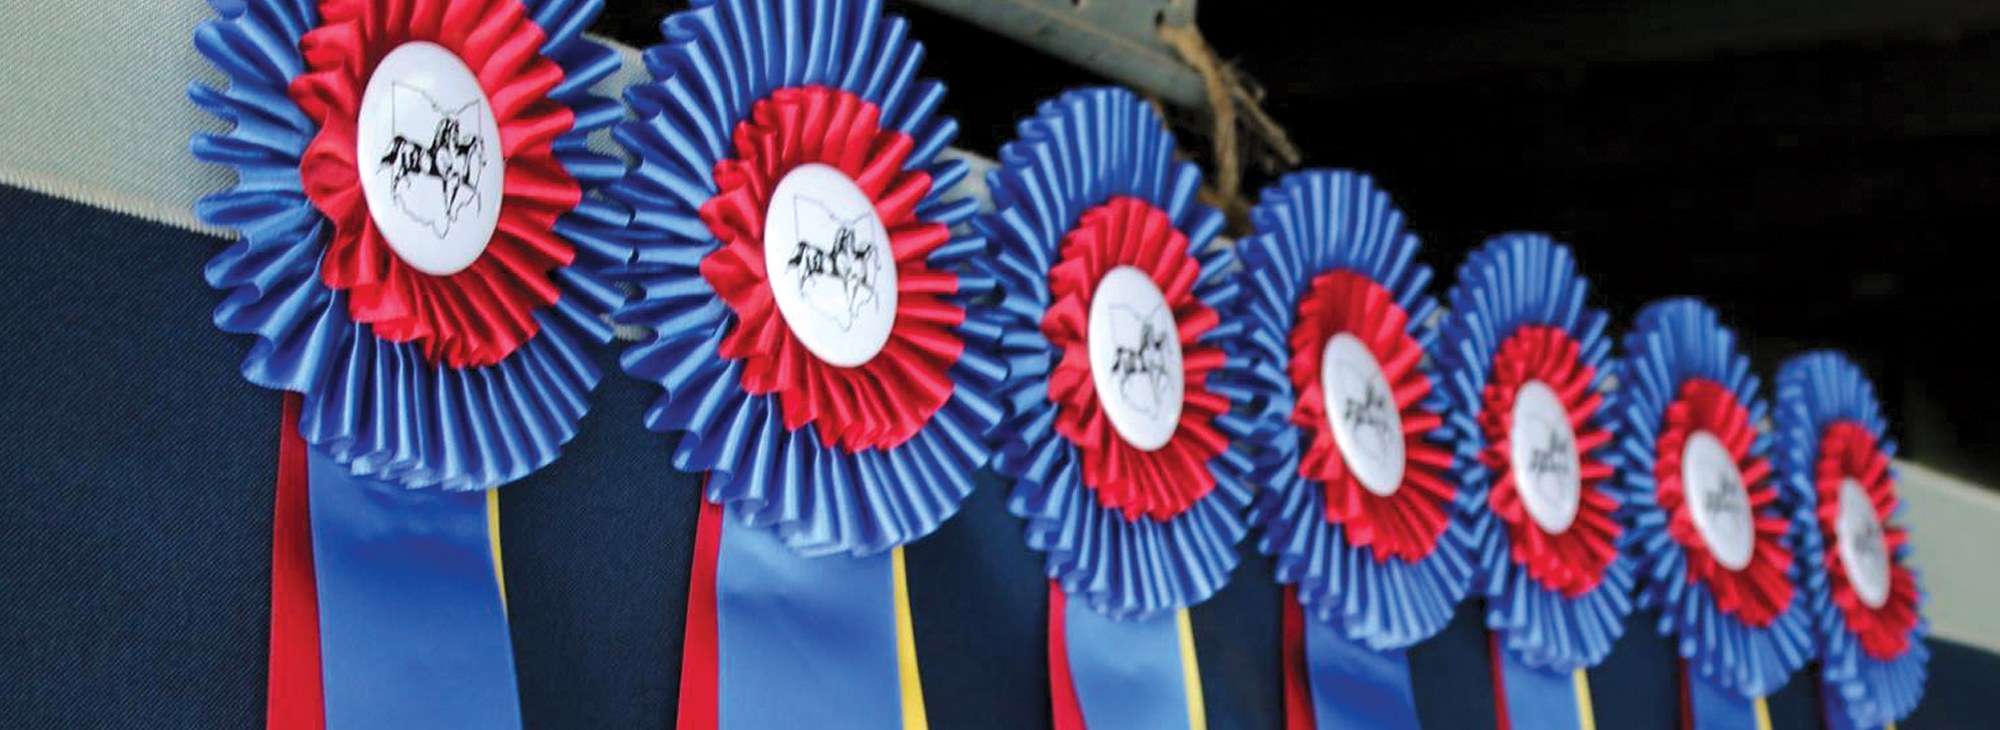 news_headerimage_pages_header_news_events_competitions_show_results.jpg